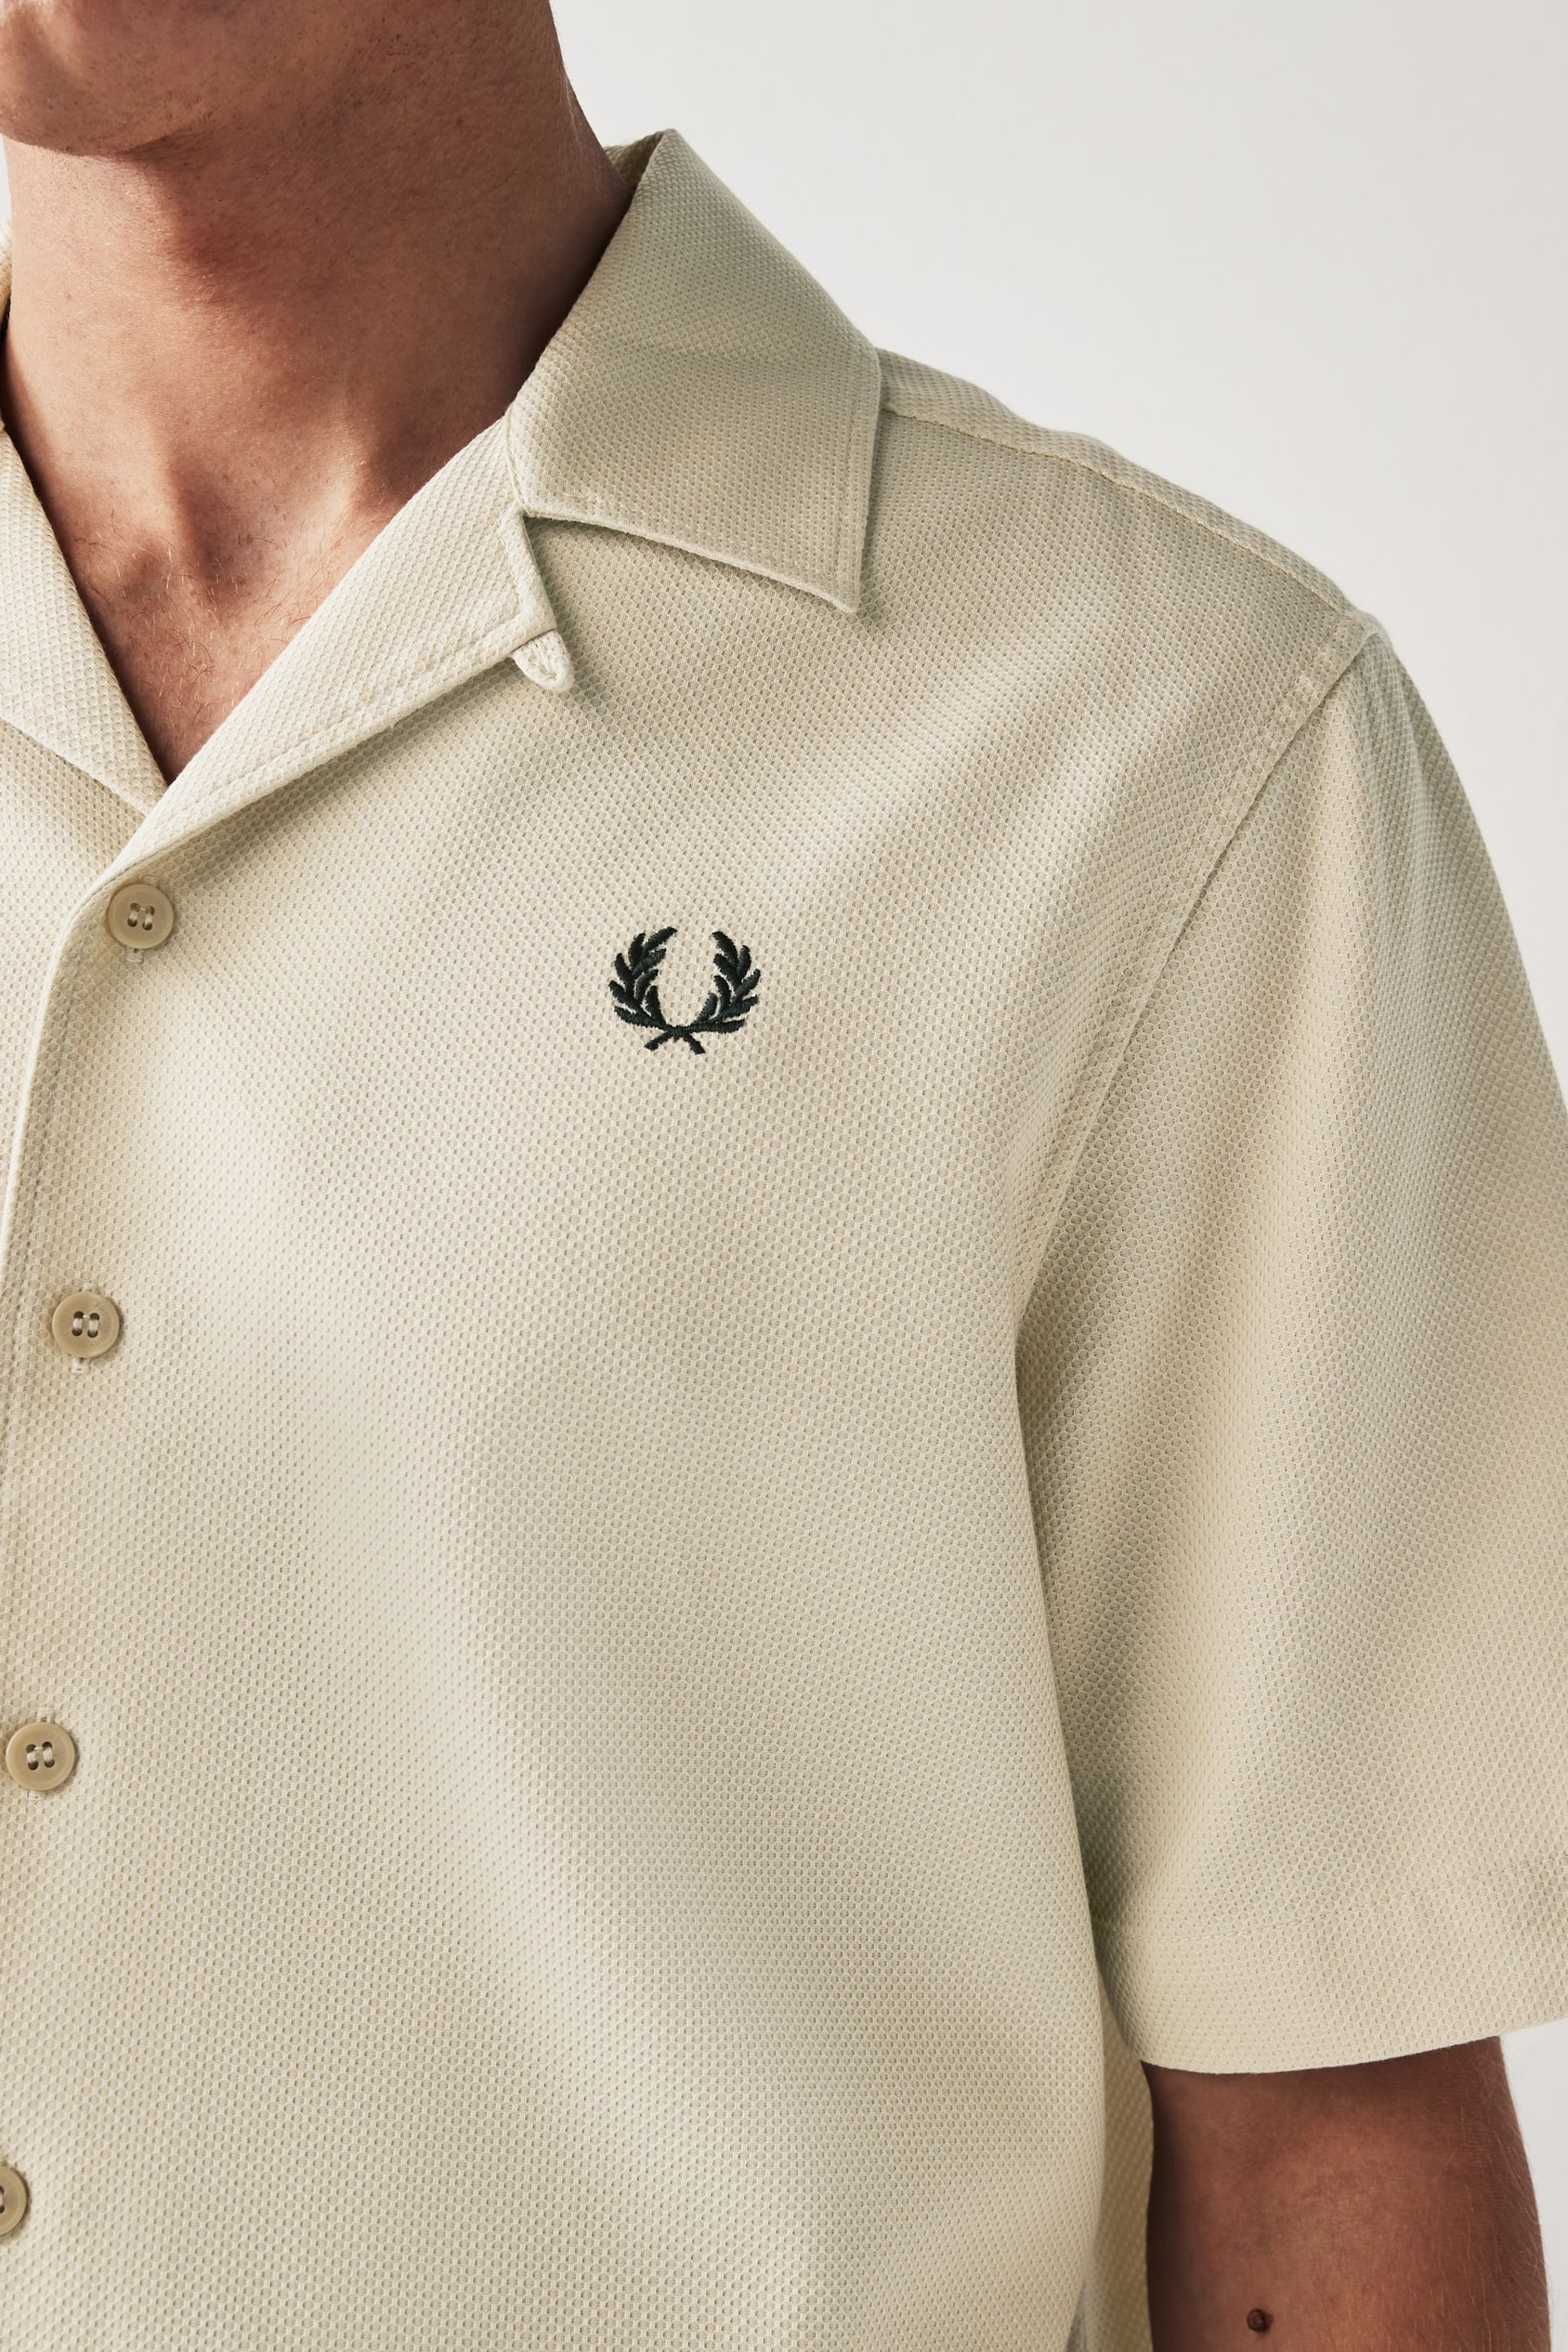 Fred Perry Textured Revere Collar Resort Short Sleeve Shirt - Image 4 of 6